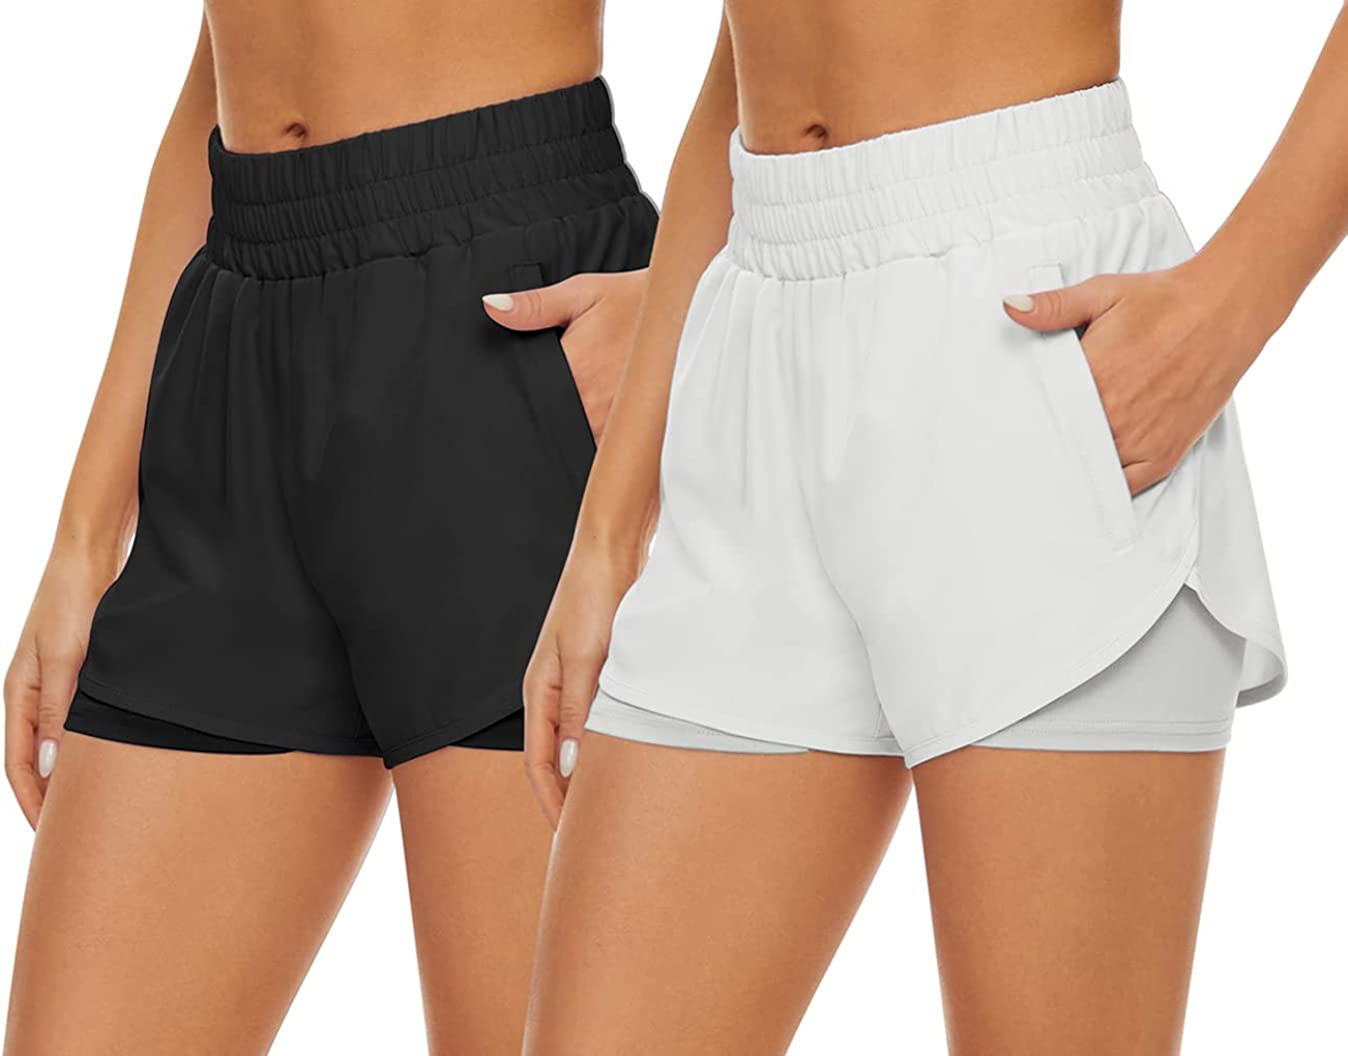 Buy HKJIEVSHOP 2 Pack Athletic Shorts for Women Quick Dry Running